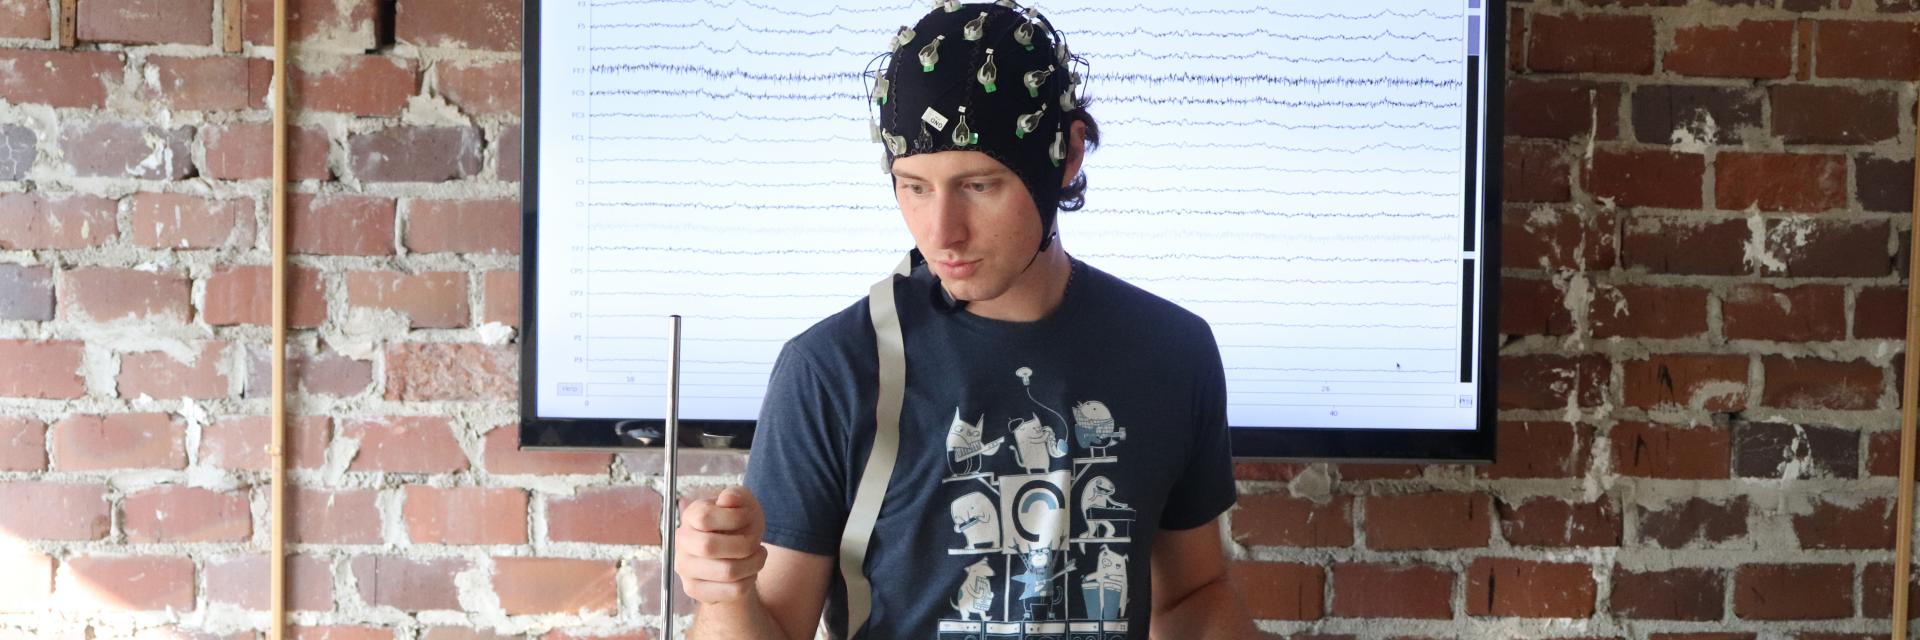 Mike Winters, a Ph.D. student, playing a theramin while wearing a brain scan cap.